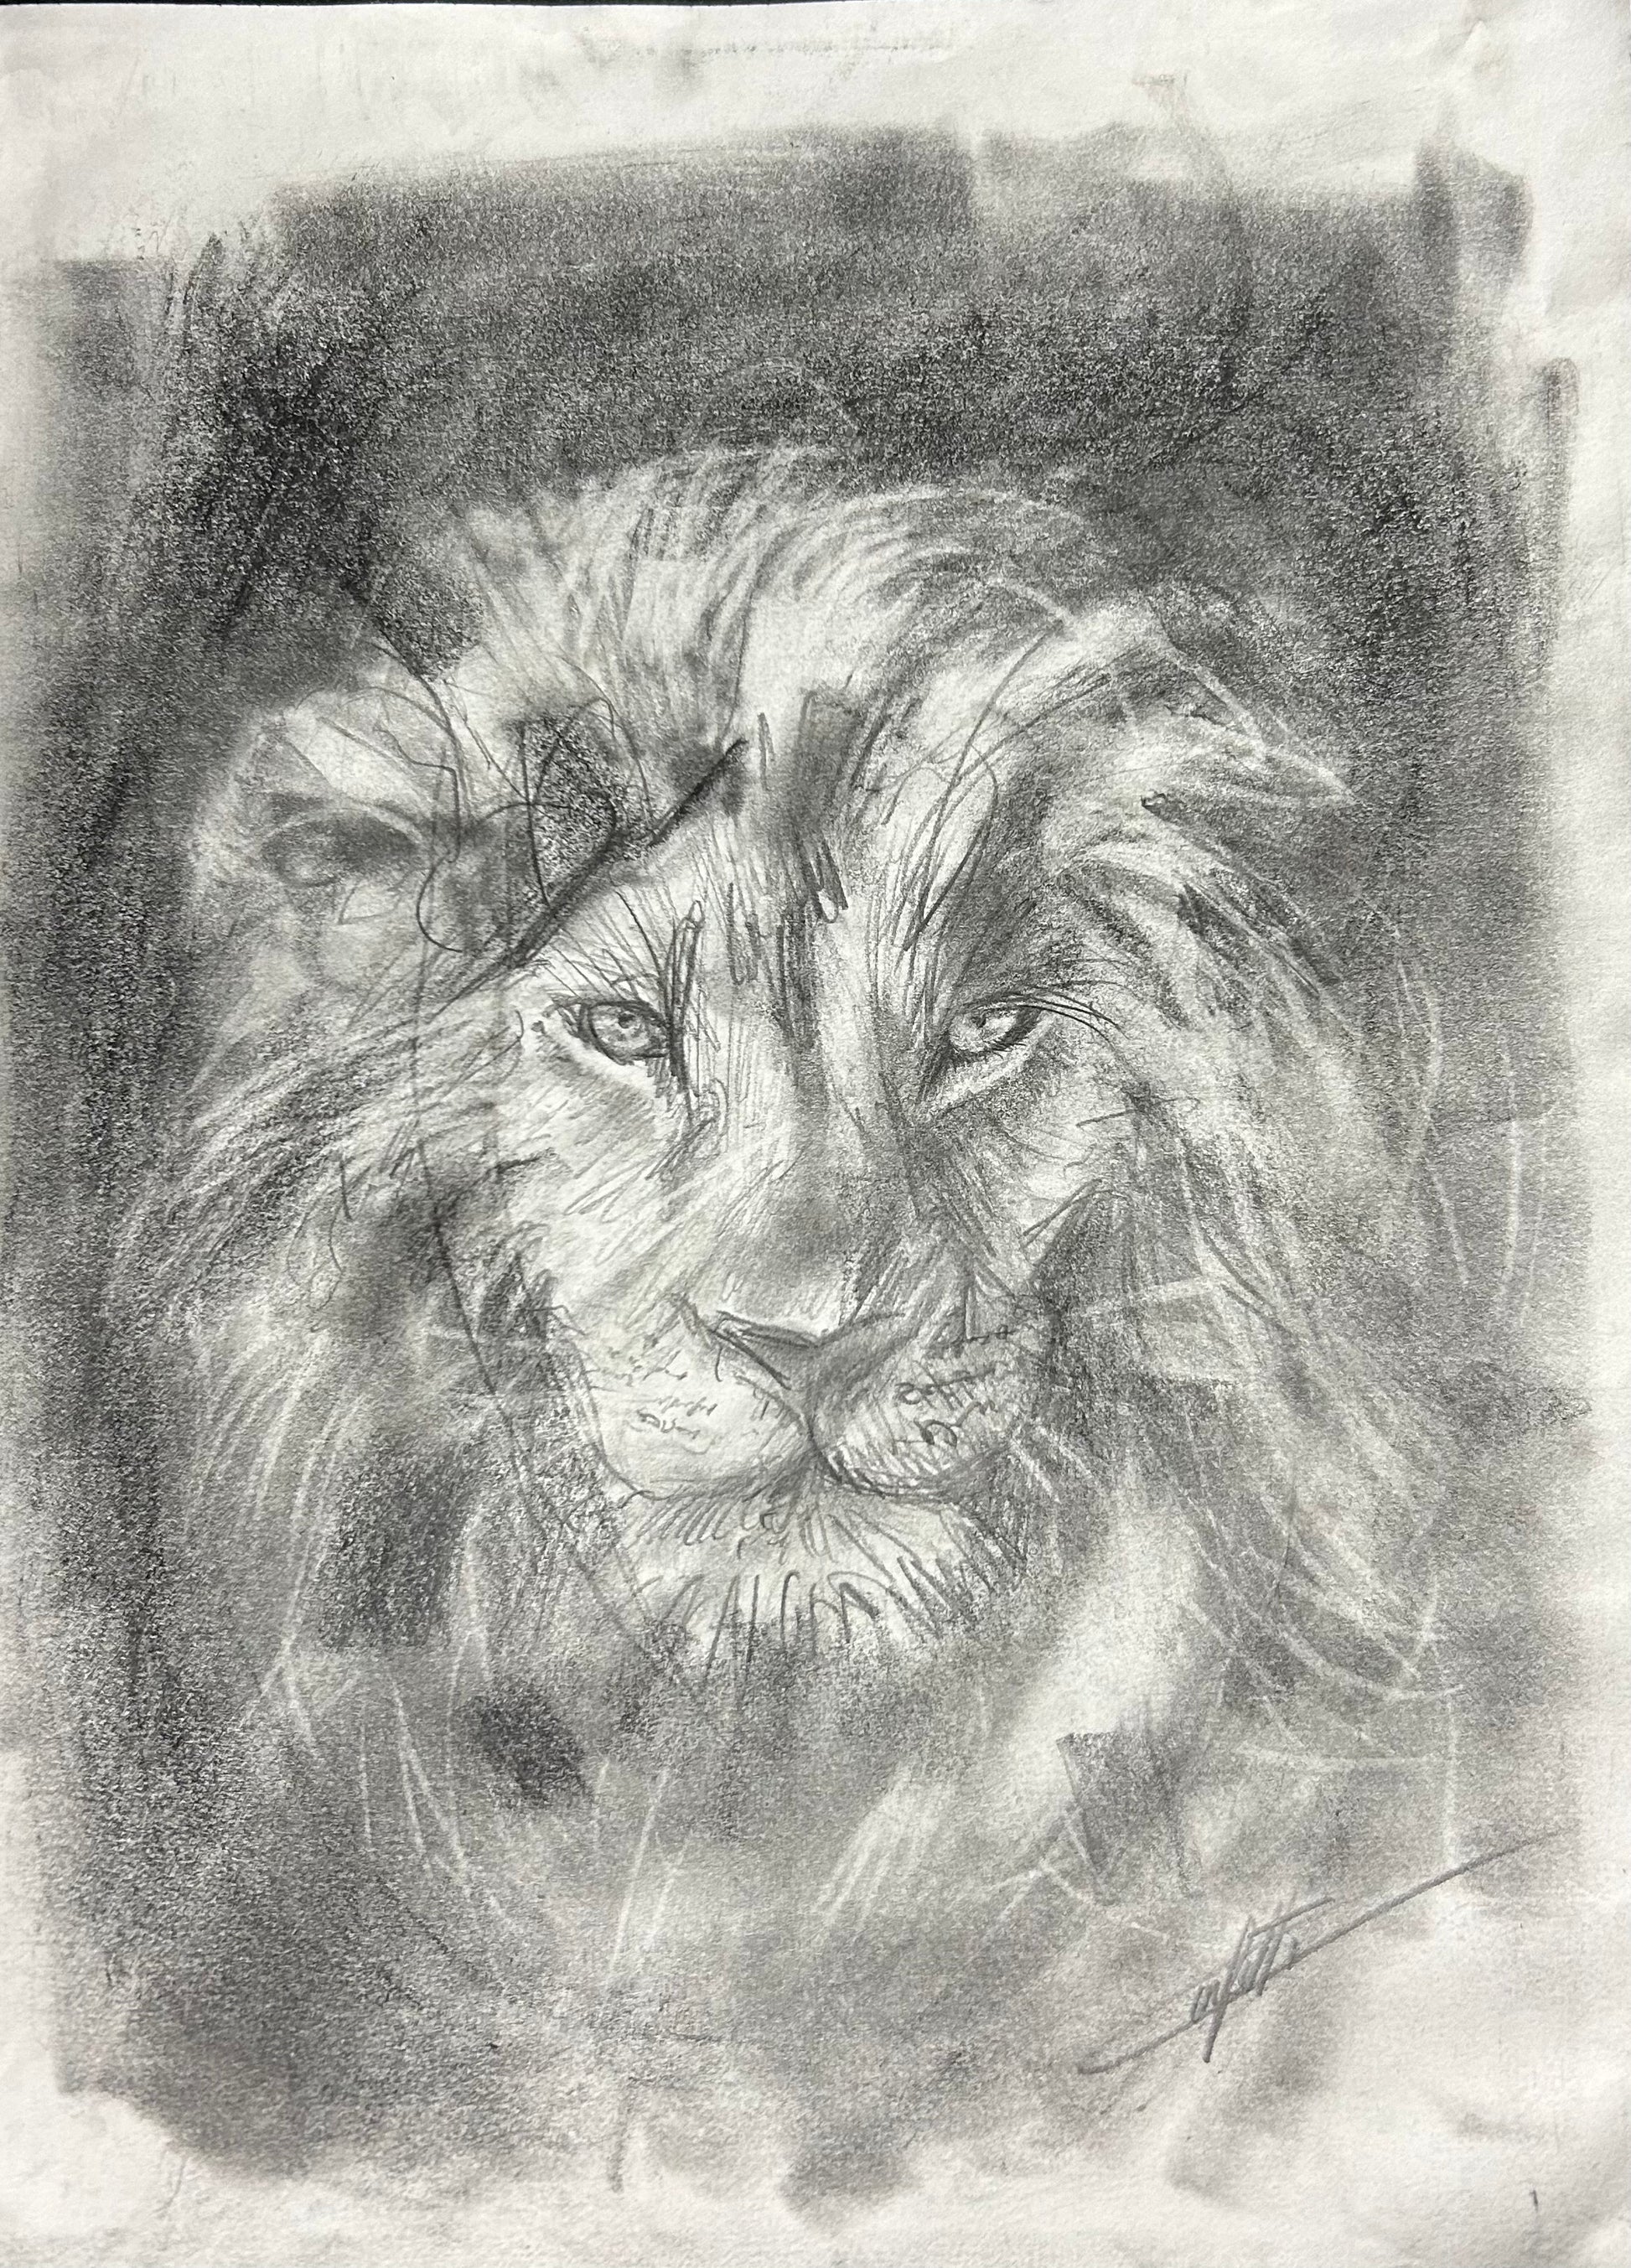 Confetti Artist: Animal sketch ''The vision of the lion'' sketching study of the artist Confetti in graphite pencil on paper